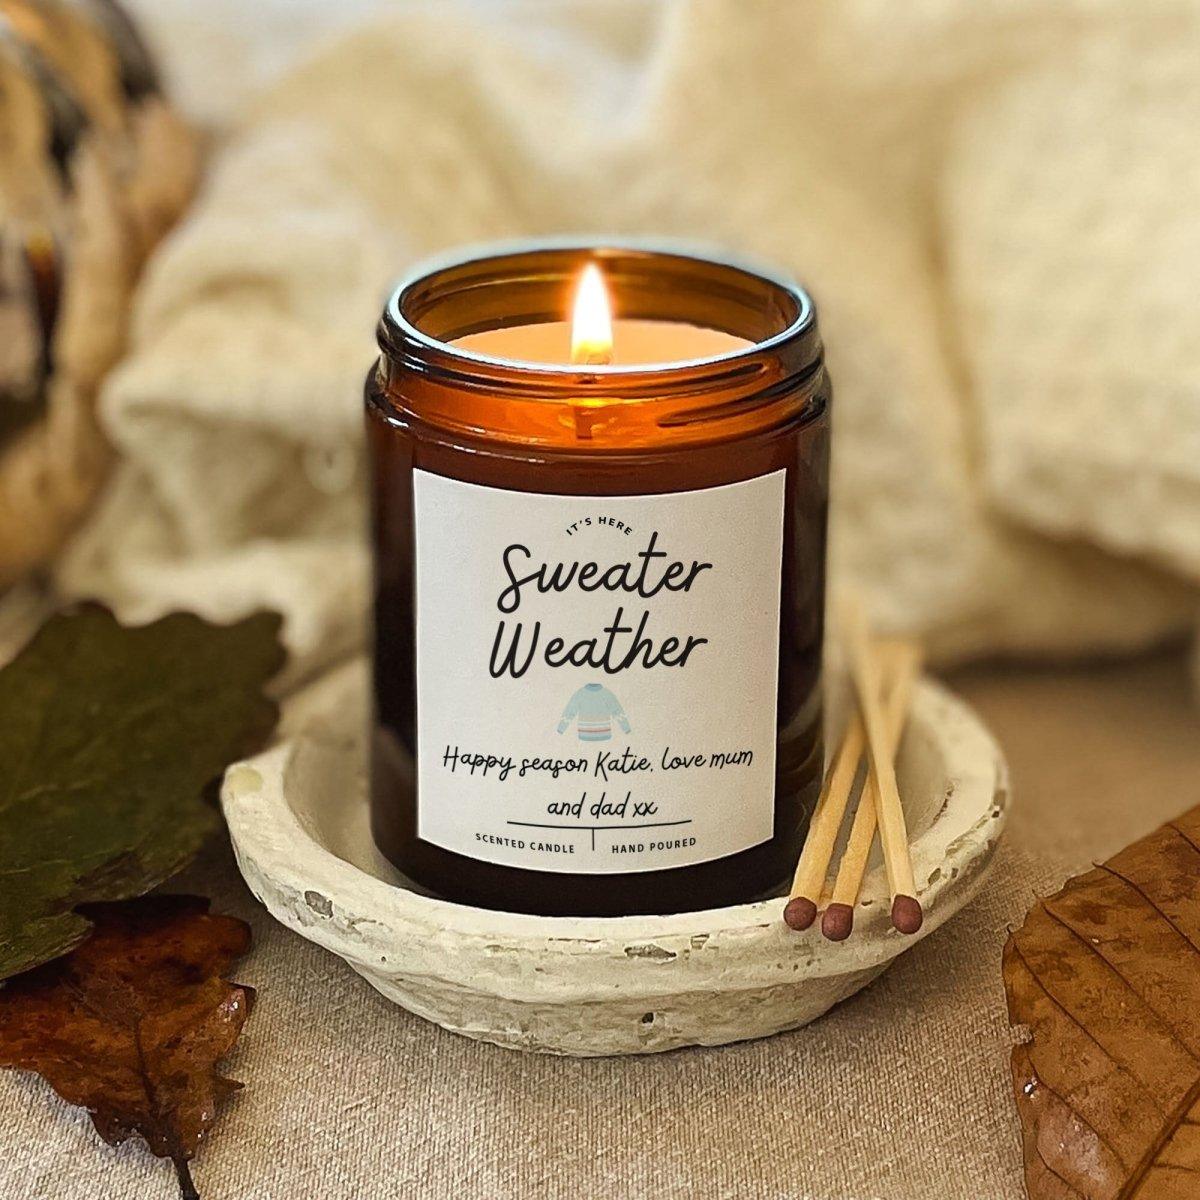 Personalised Sweater Weather Candle, Autumn Candle, Fall Season Candle, Autumn Vibes, Vegan Candle, Brown Jar Candle, Scented Candle, Fall - Amy Lucy